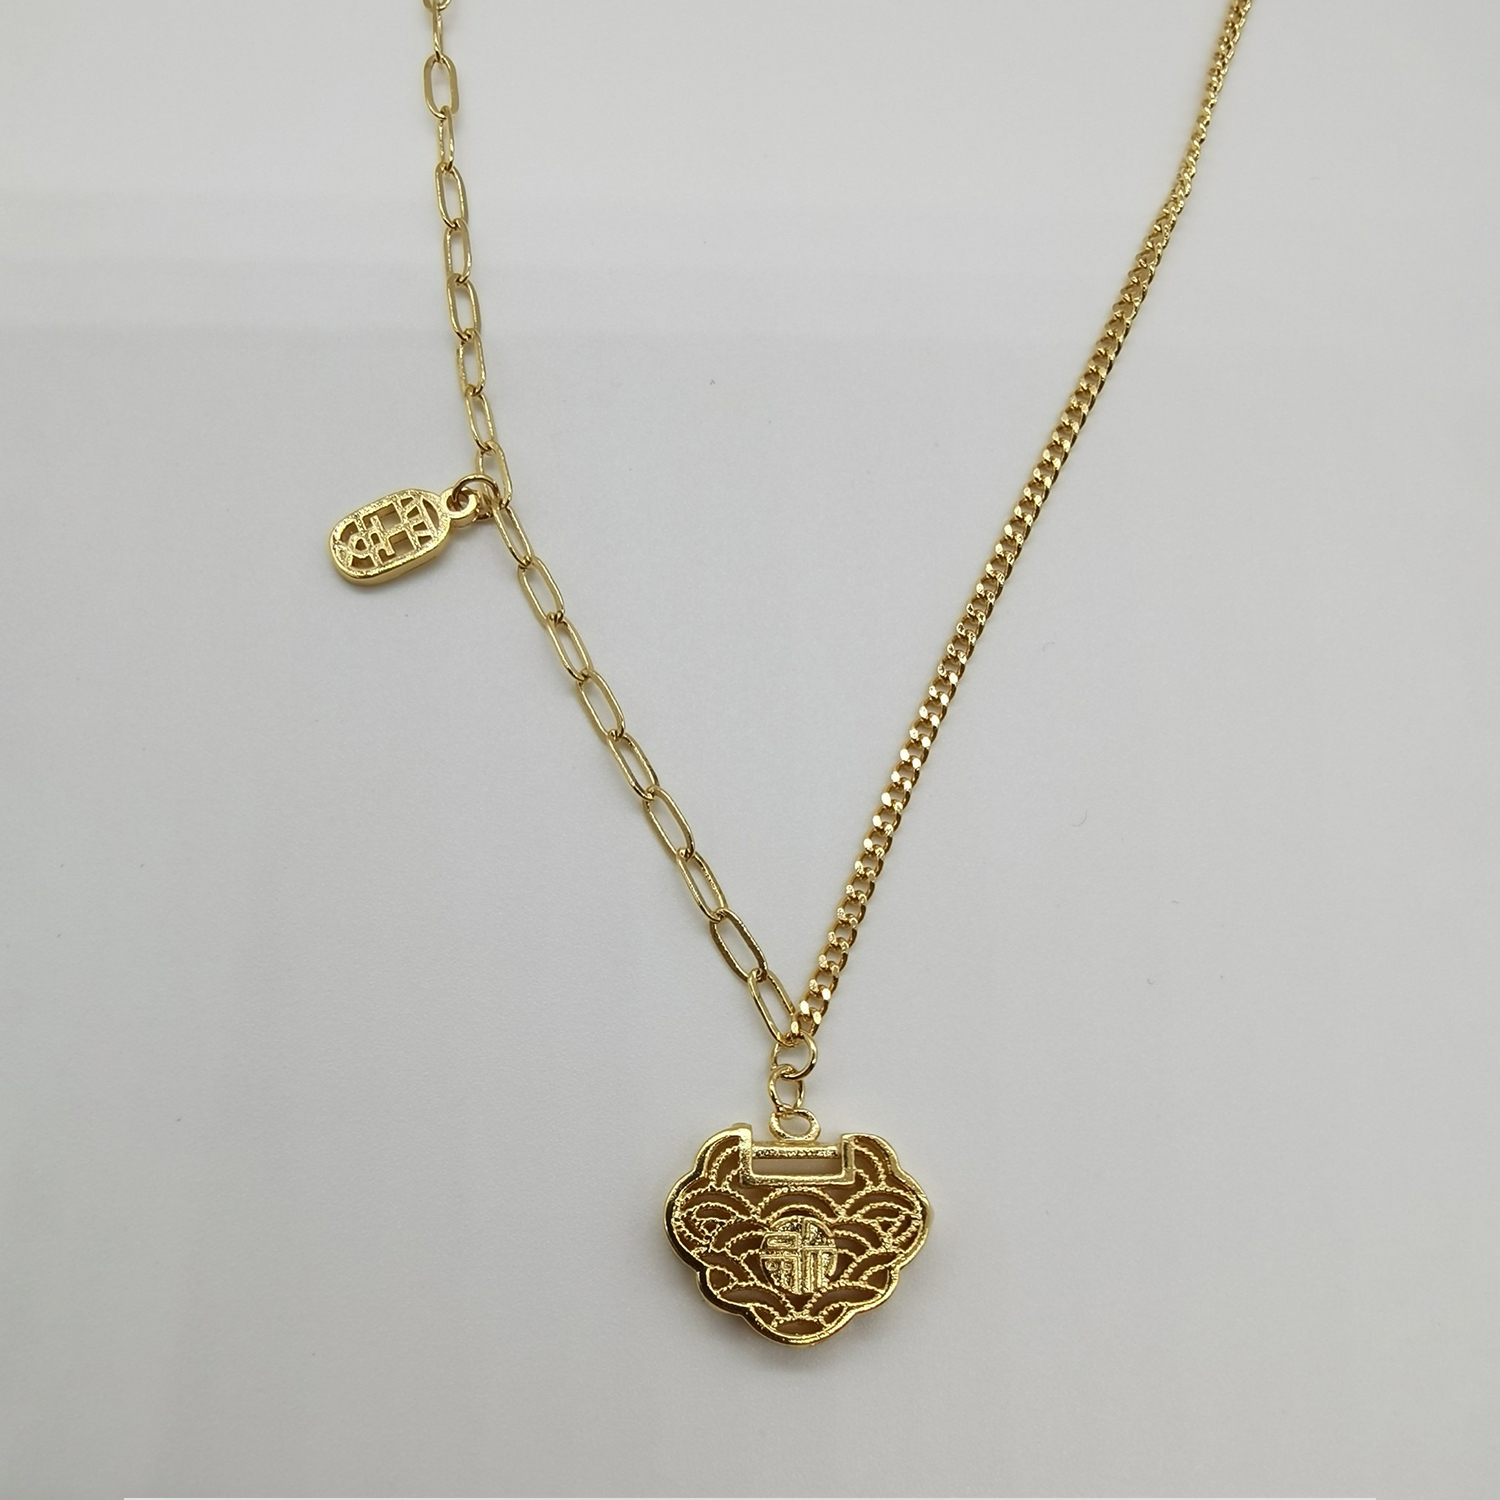 Alluvial gold vacuum electroplating 24K gold hollow longevity lock necklace with blessing character